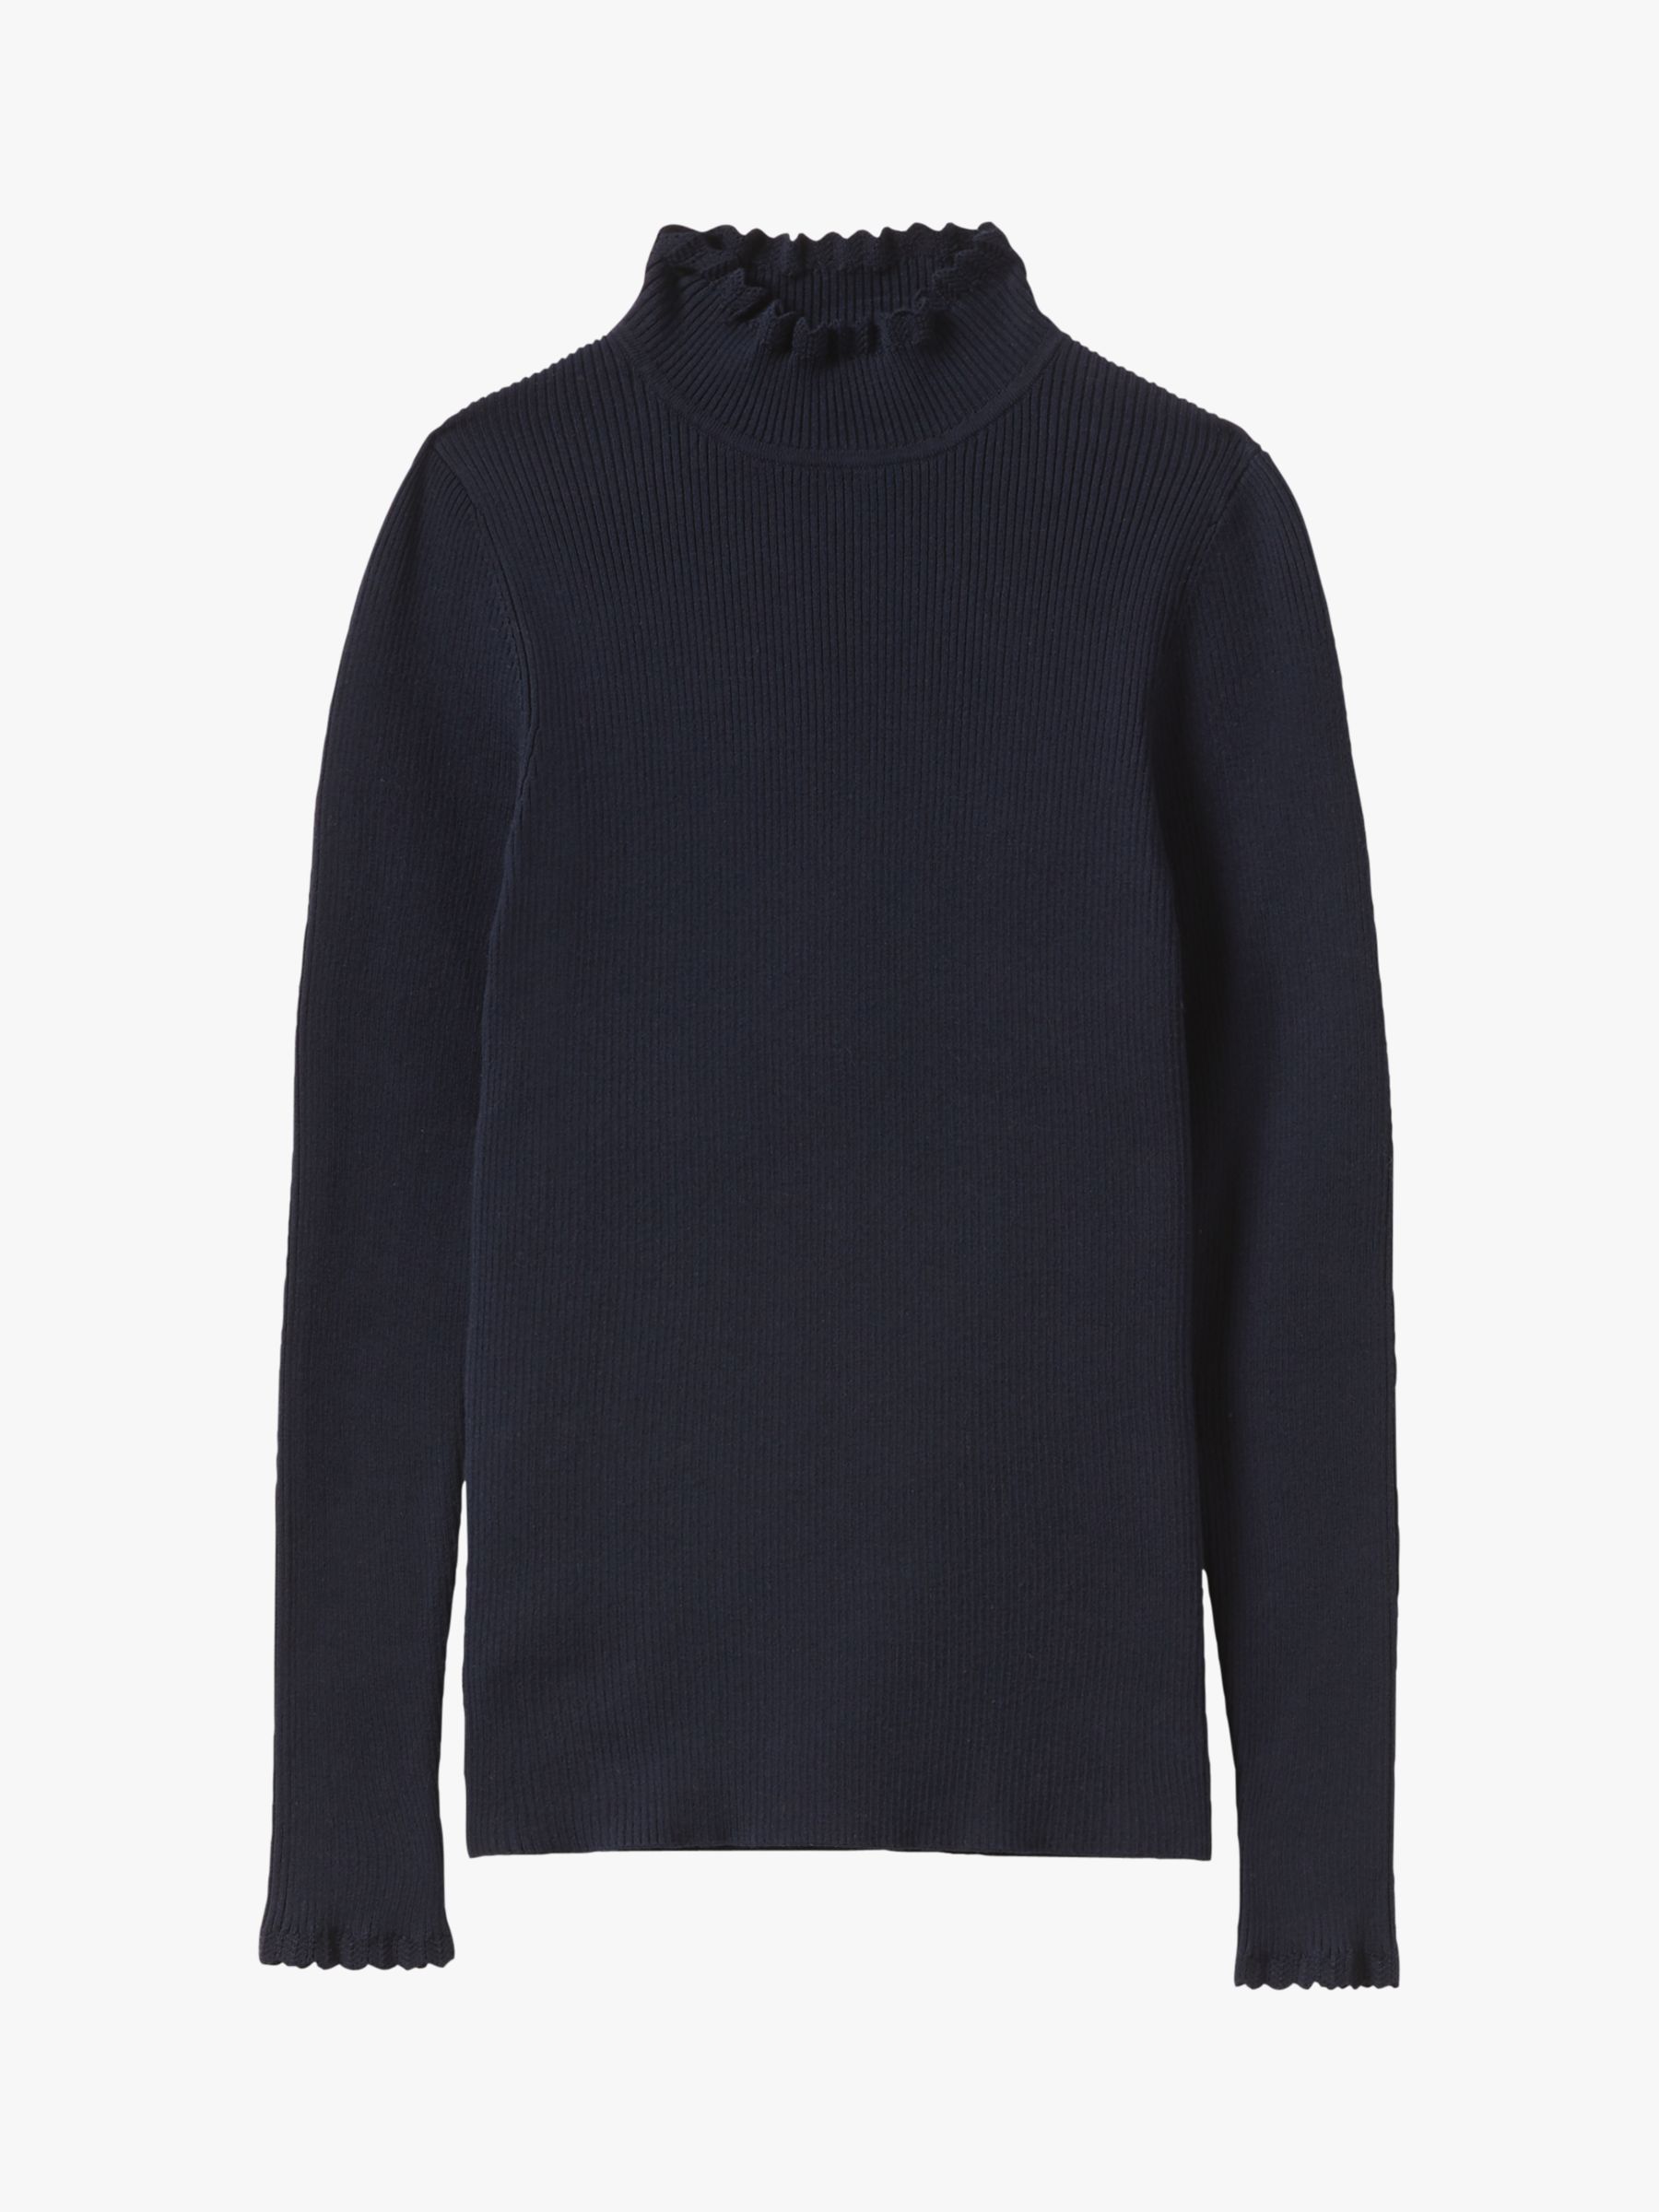 Boden Scallop High Neck Ribbed Jumper, Navy at John Lewis & Partners